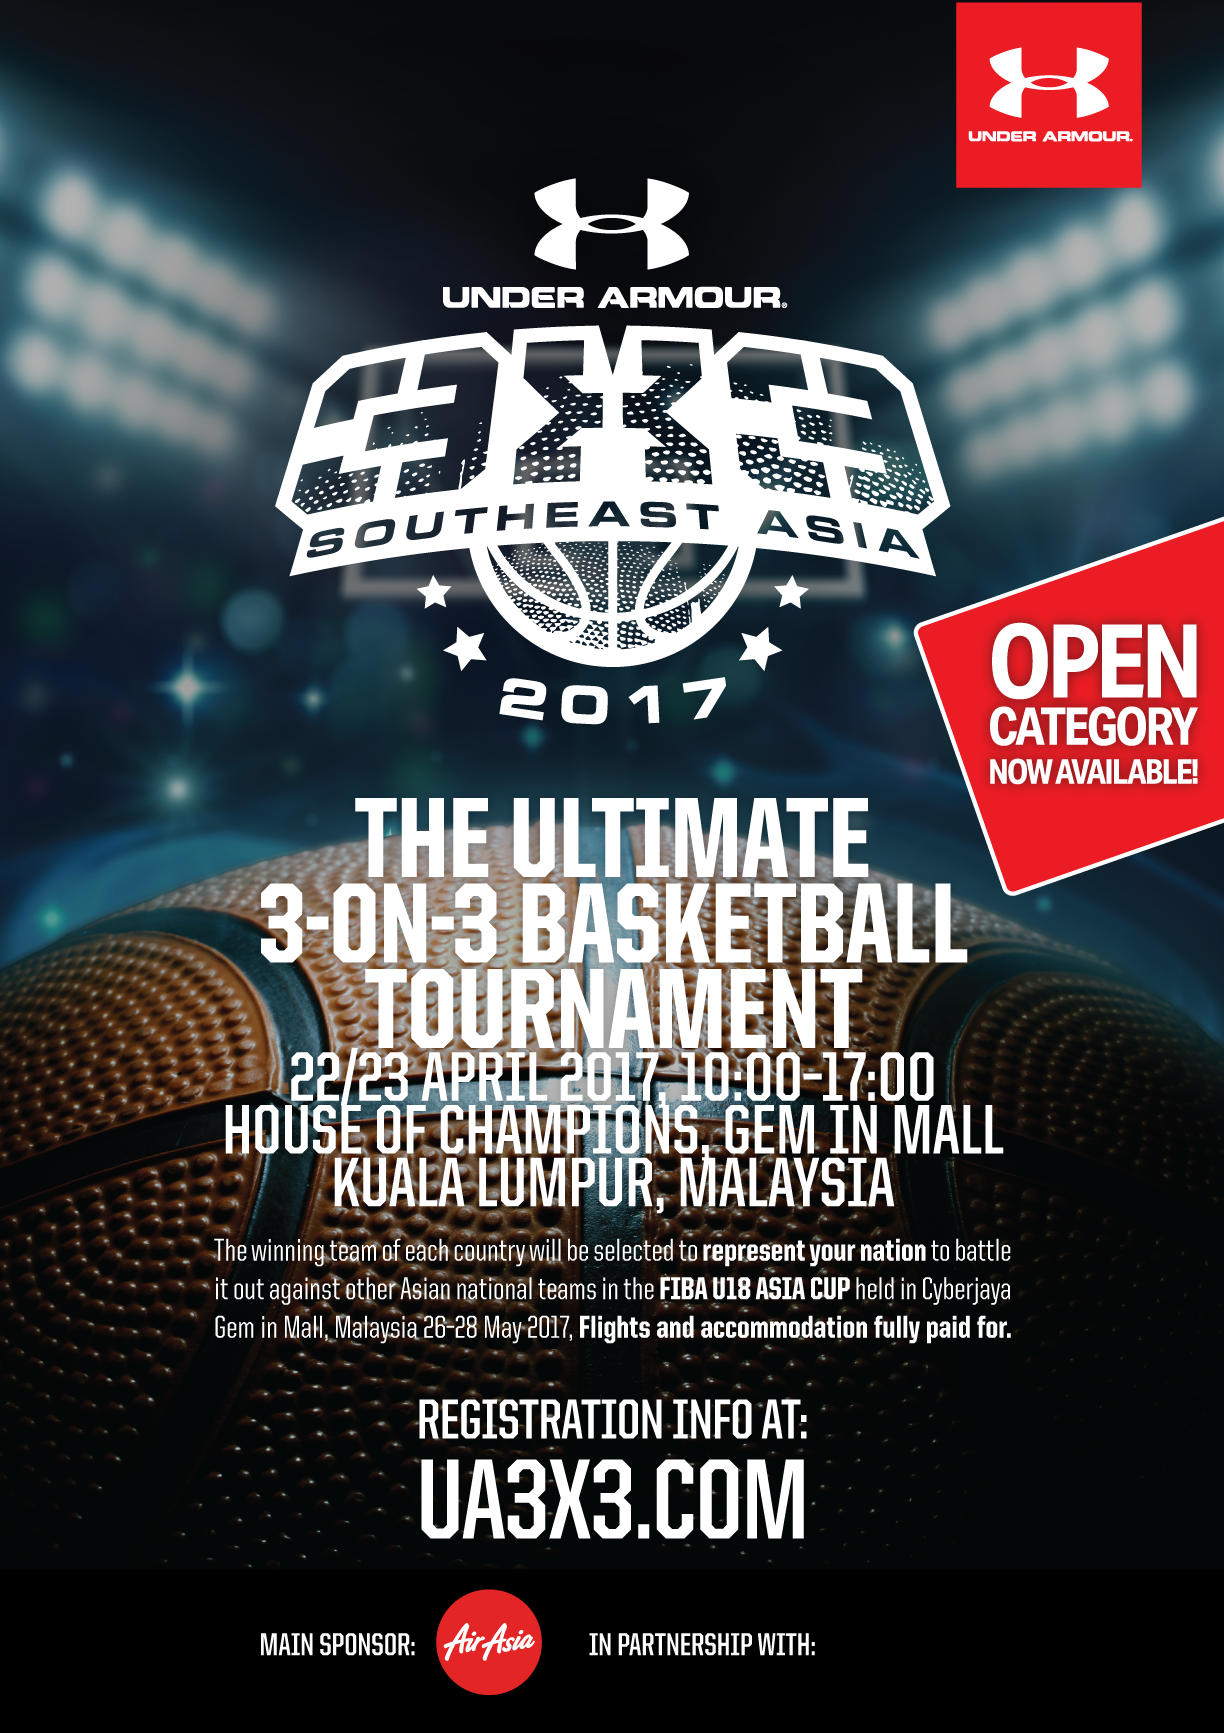 Moon Migration Upbringing Under Armour 3x3 Southeast Asia 2017 Tournament: Registration Sponsorship &  New Open Category Now Available | Pamper.My